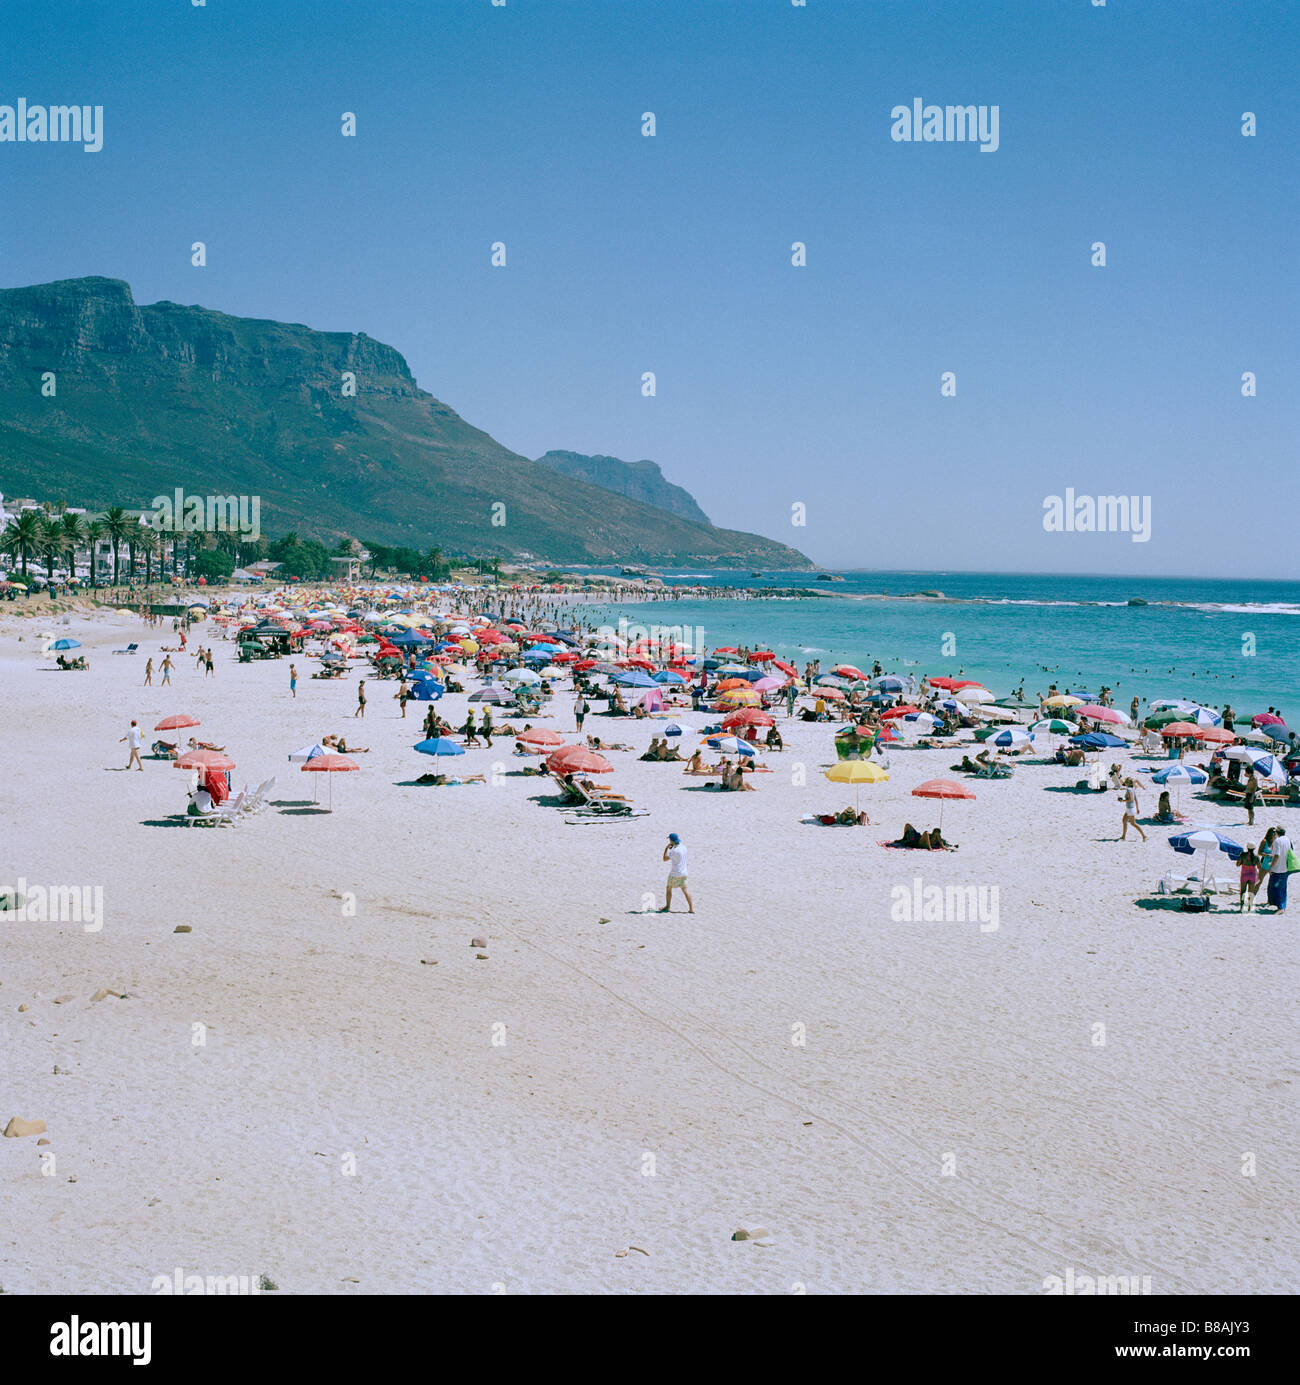 Camps Bay beach and sea in Cape Town in South Africa Sub Saharan Africa. Apartheid Capetown African Holiday Vacation Tourism Tourist Travel Seascape Stock Photo